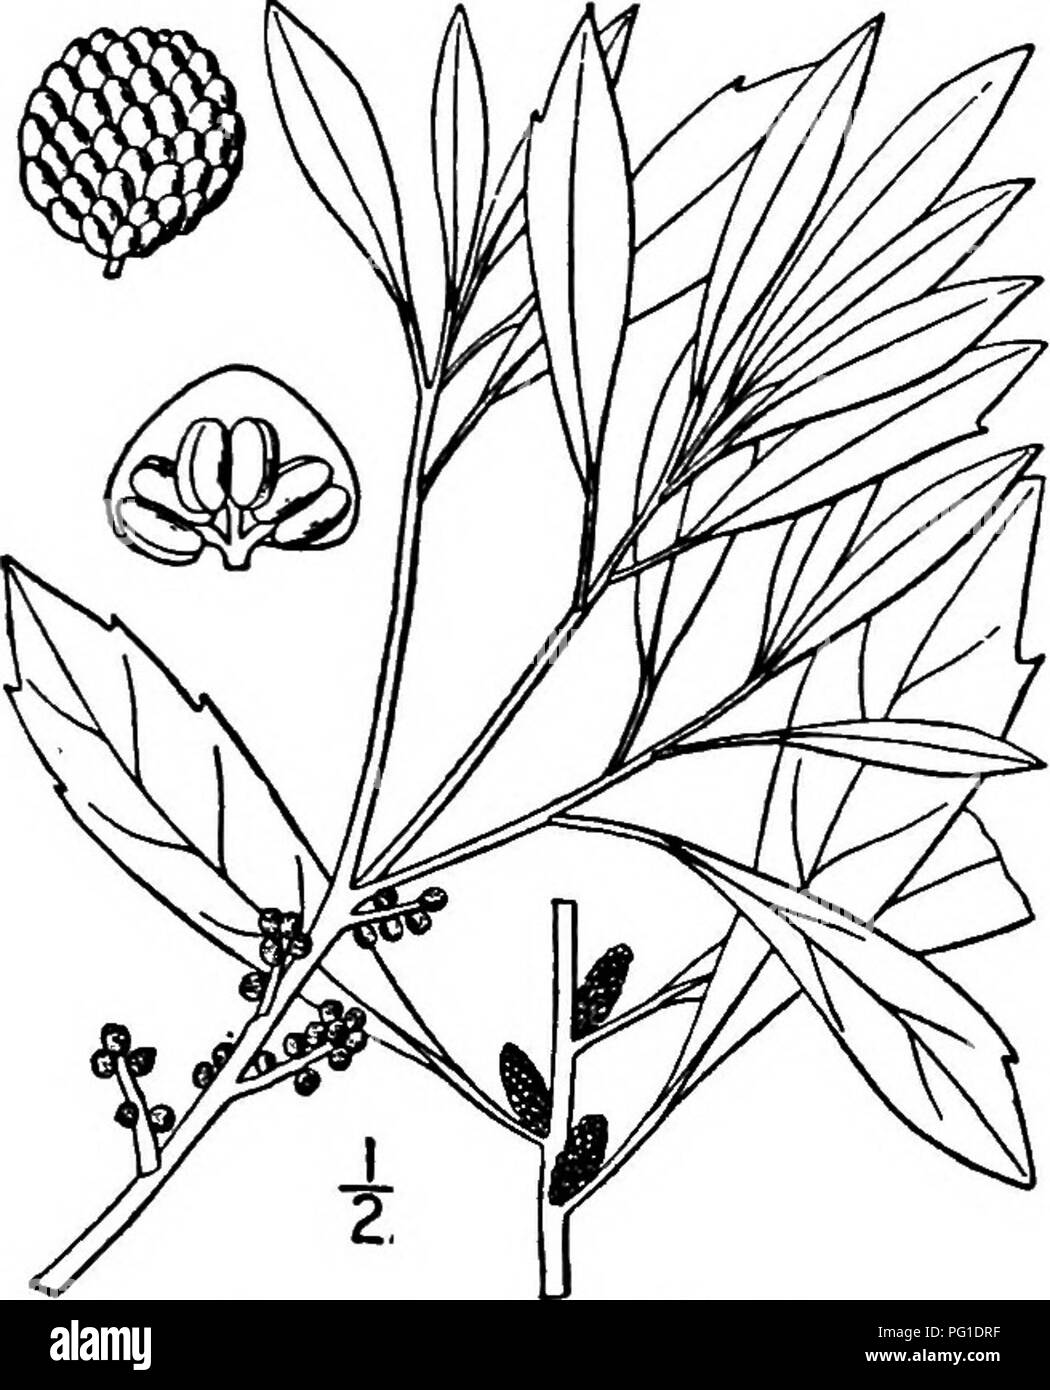 . North American trees : being descriptions and illustrations of the trees growing independently of cultivation in North America, north of Mexico and the West Indies . Trees. 210 The Bayberry Family I. WAX MYRTLE —Myrica cerifera Linnaus A small aromatic evergreen tree or shrub inhabiting sandy soils from Delaware to Florida and through the Gulf States to Texas and Arkansas, occurring mostly near the coast; also in the West Indies and Bermuda. It is also called Bayberry, Waxberry, Candleberry, Myrtletree, and Puckerbush, and attains a maximum height of 12 meters, with a trunk diameter of 3 dm. Stock Photo